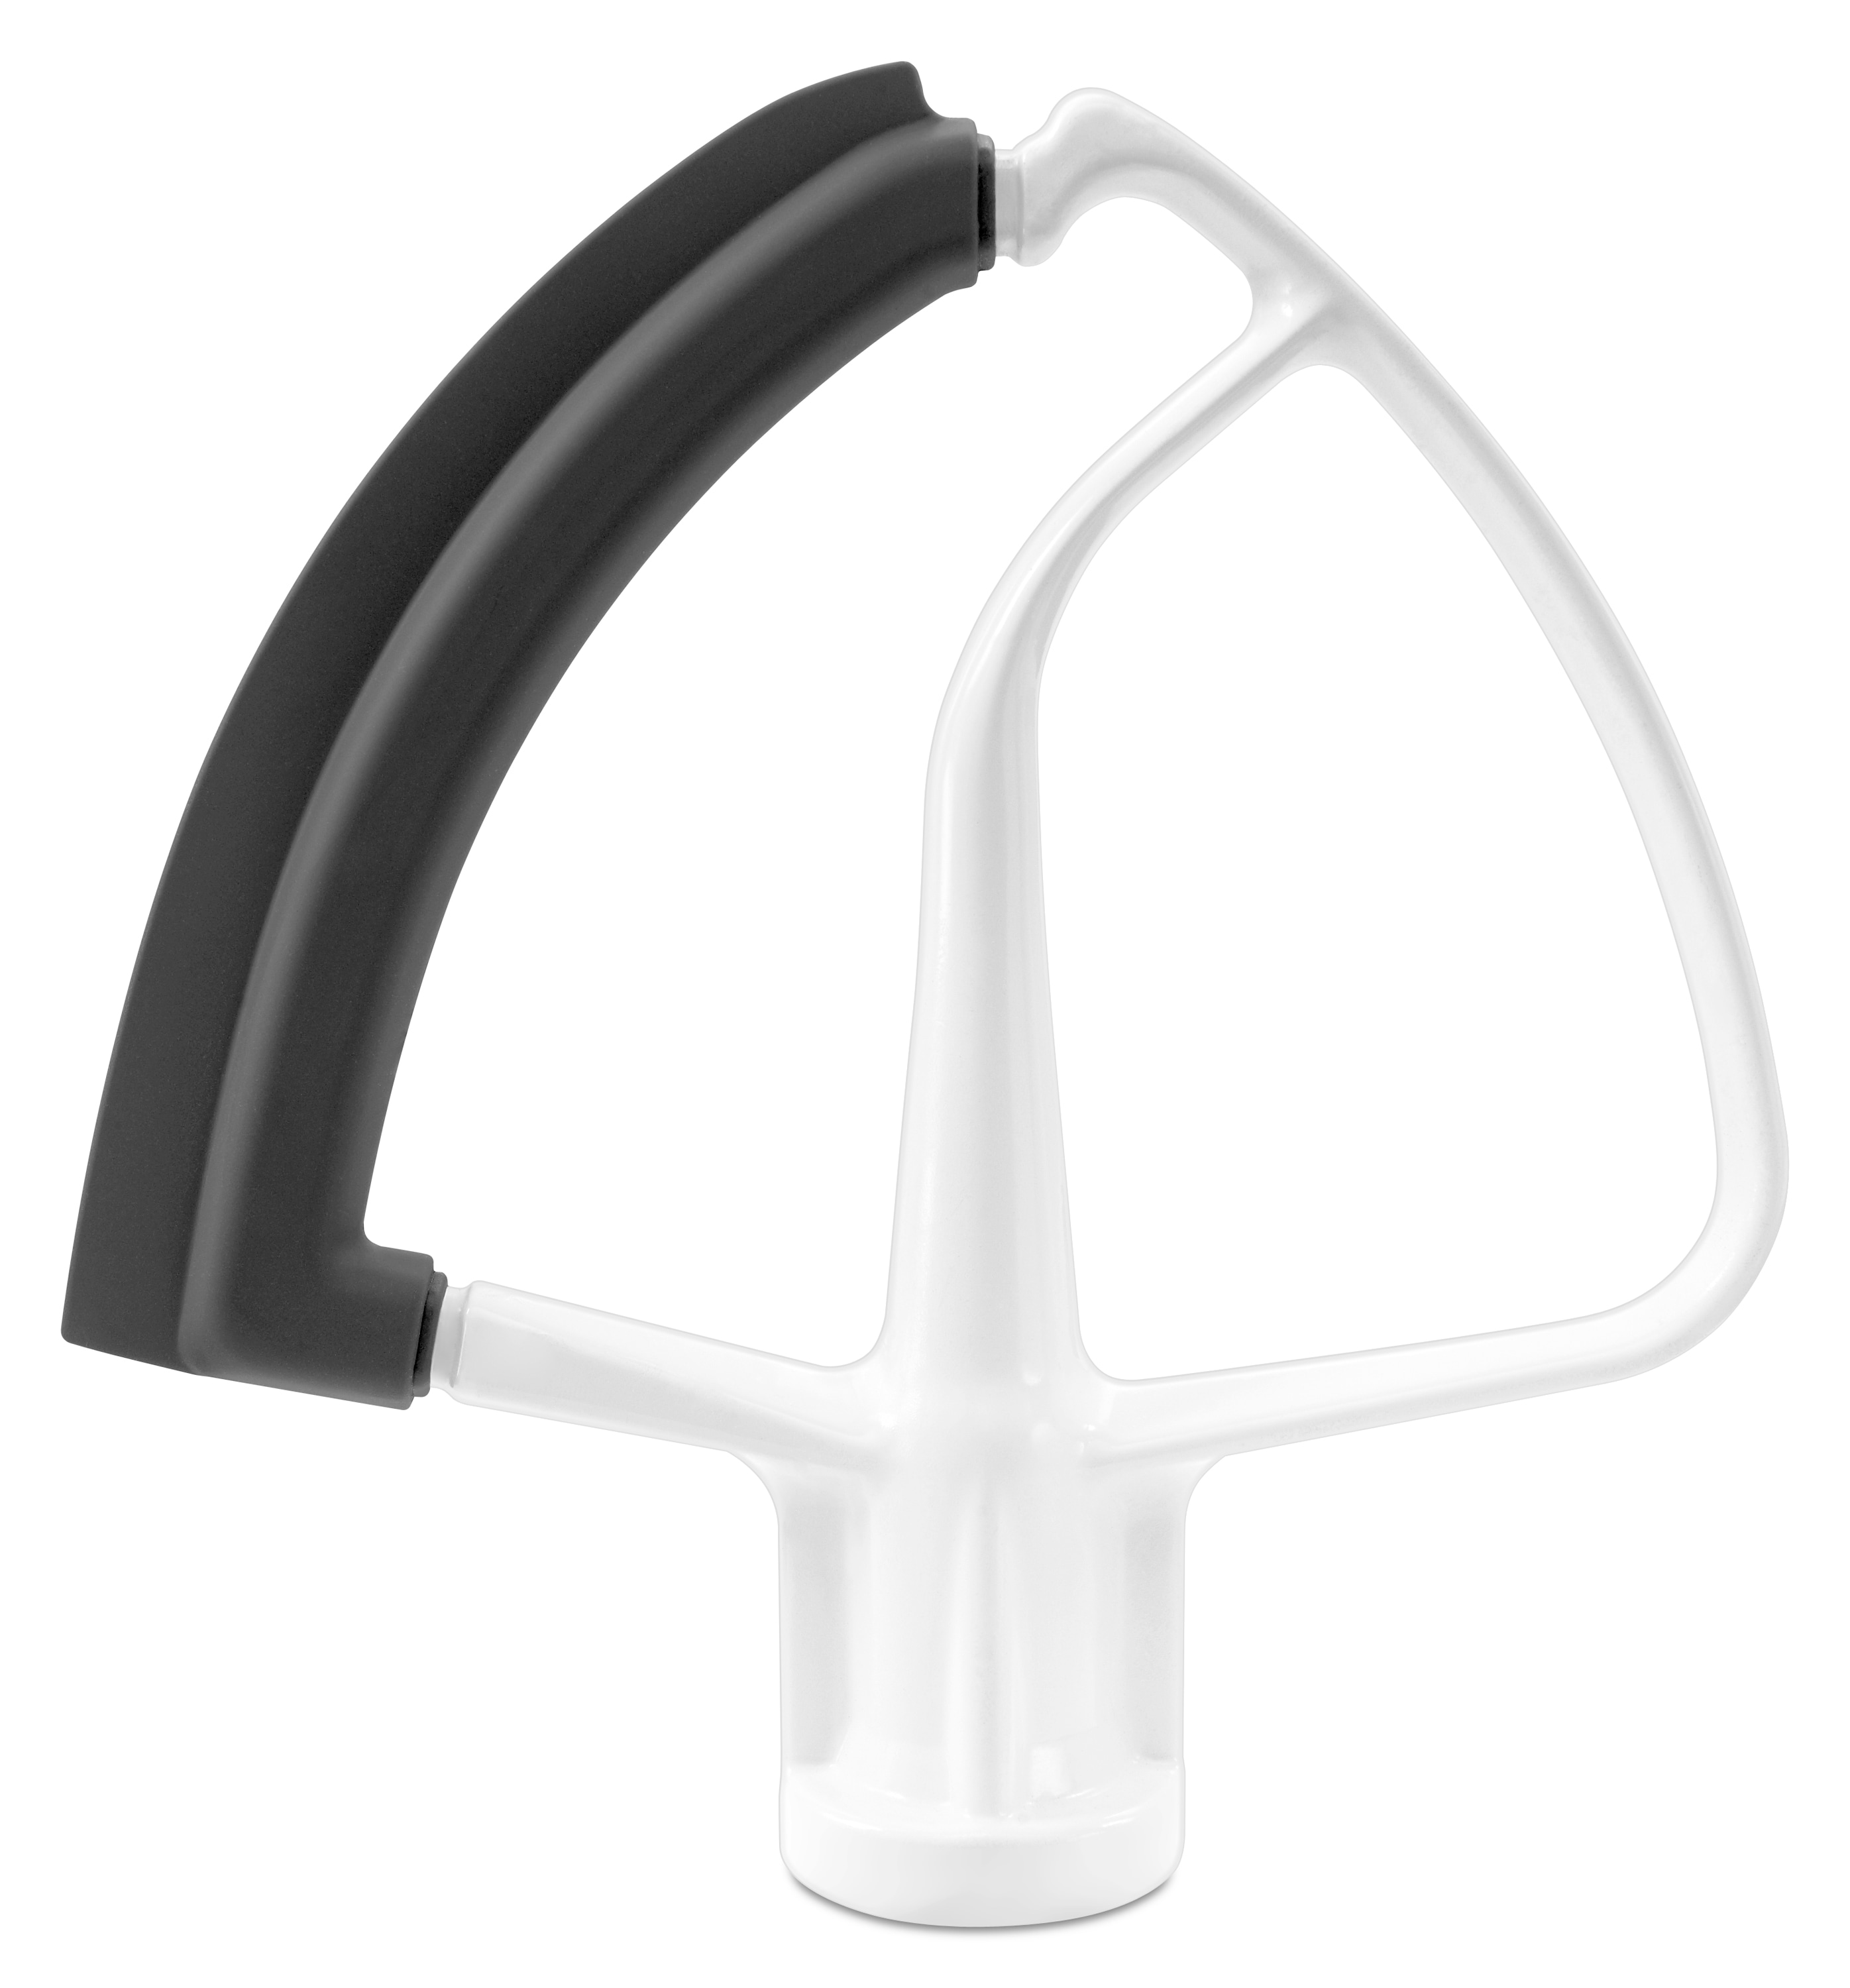 KitchenAid Fitted Stand Mixer Cover Onyx Black KSMCT1OB - Best Buy